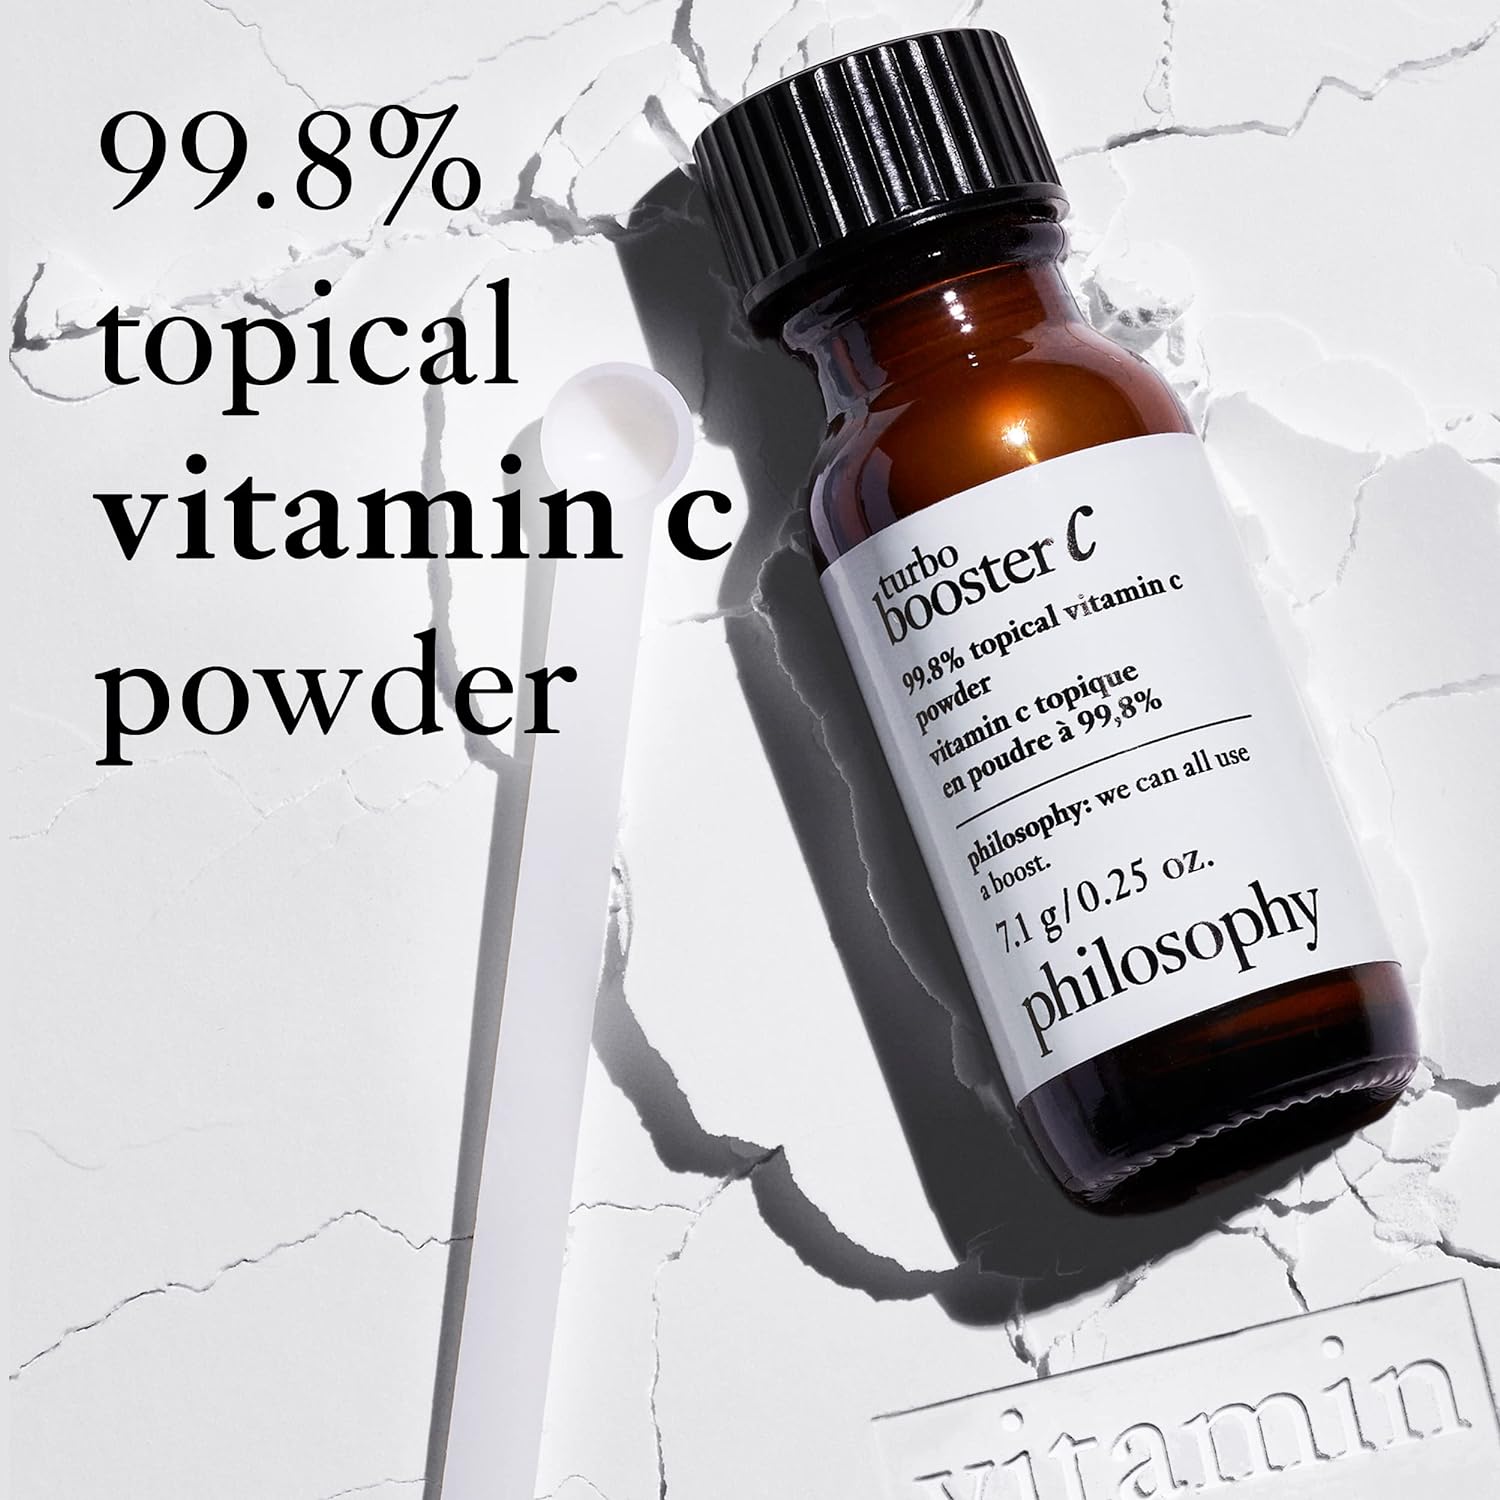 philosophy Turbo Booster c 99.8% Topical Vitamin C Powder, 0.25 Oz : Everything Else